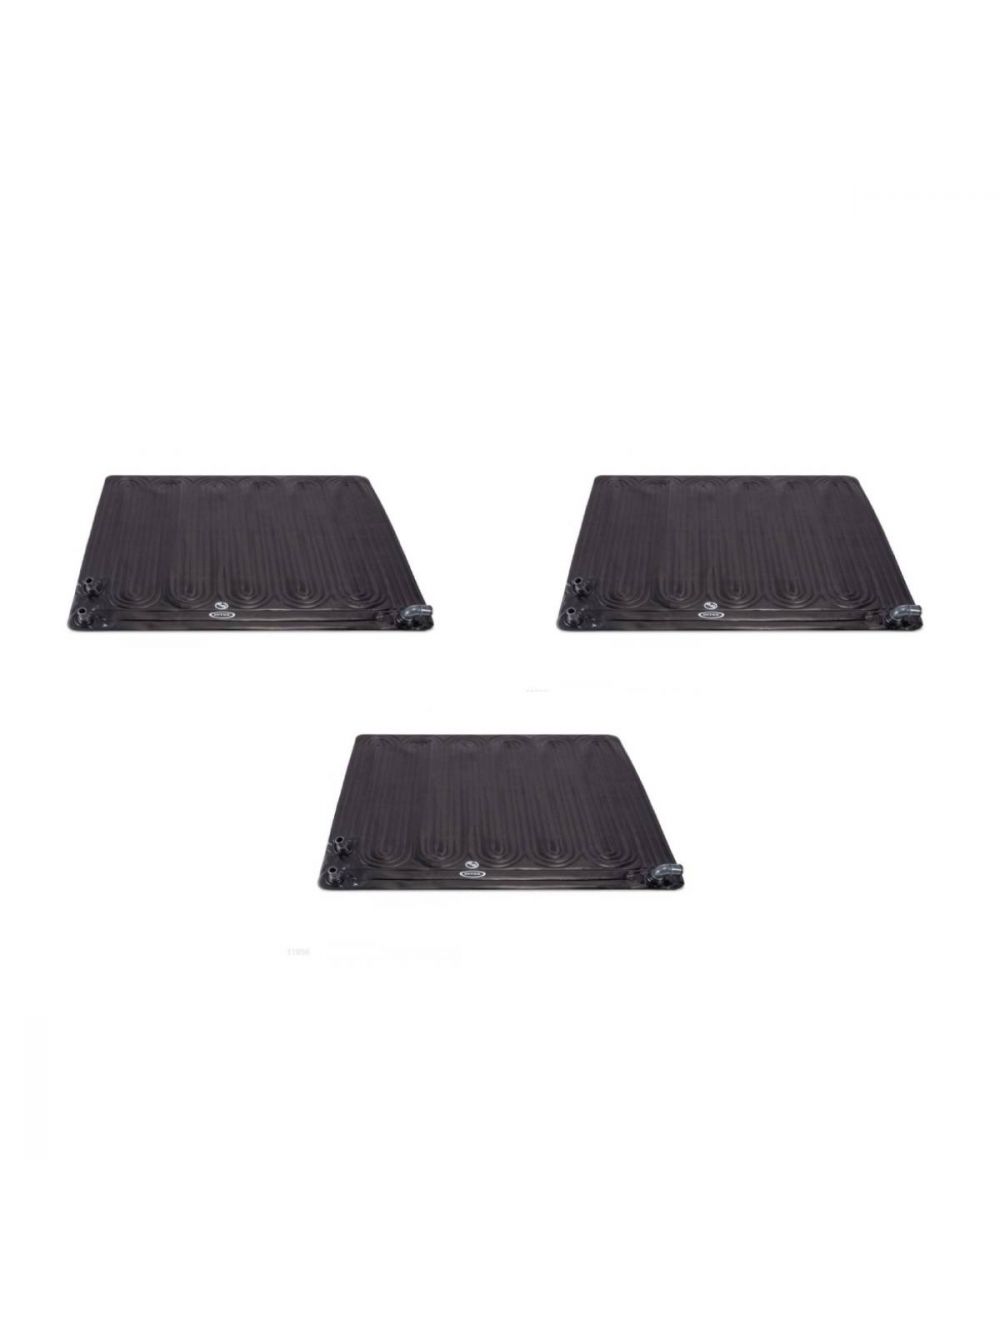 Intex Solar Heater Mat for Above Ground Swimming Pool Renewed 47in X 47in 